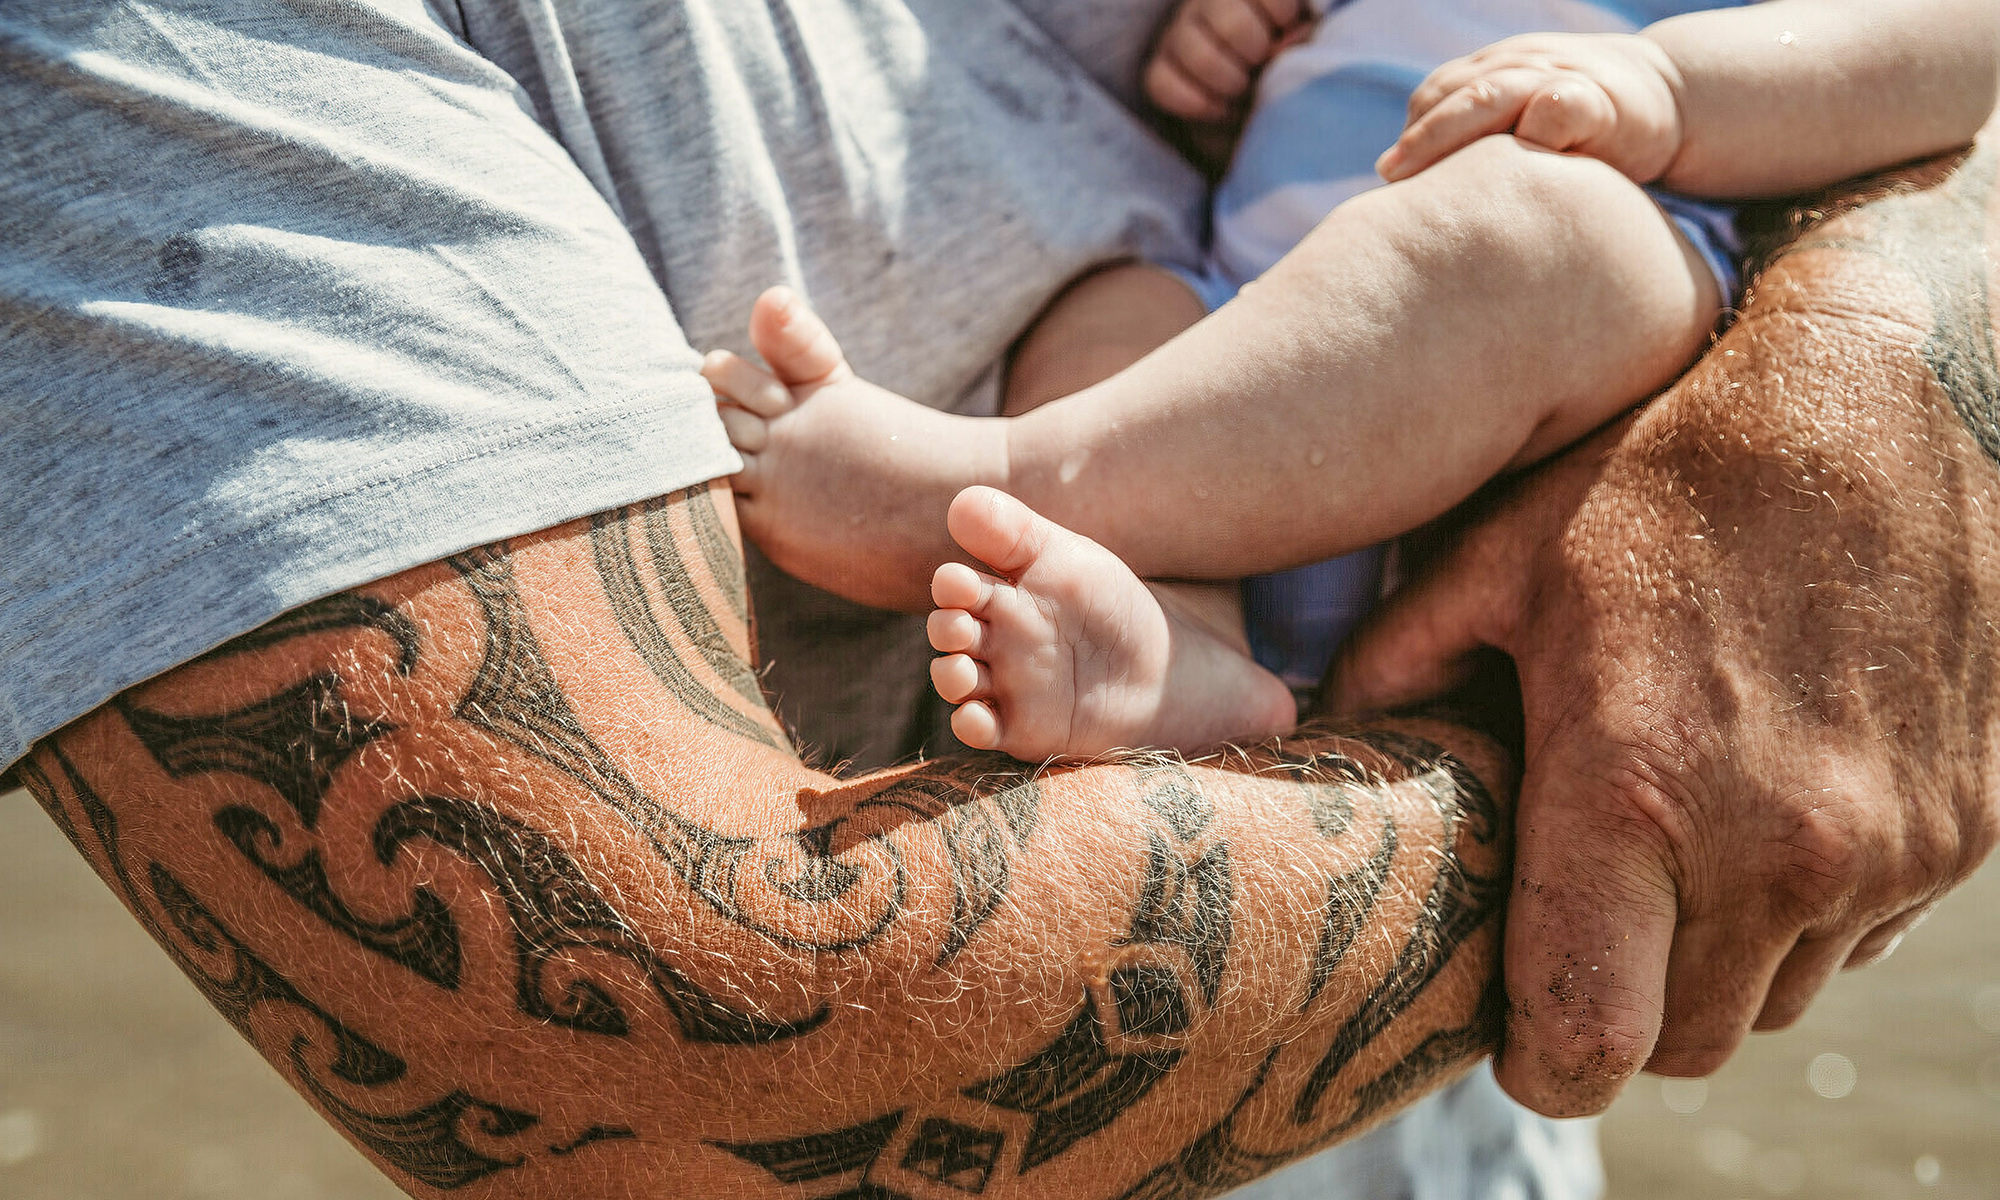 Father with tattoo cradling a baby in his arms